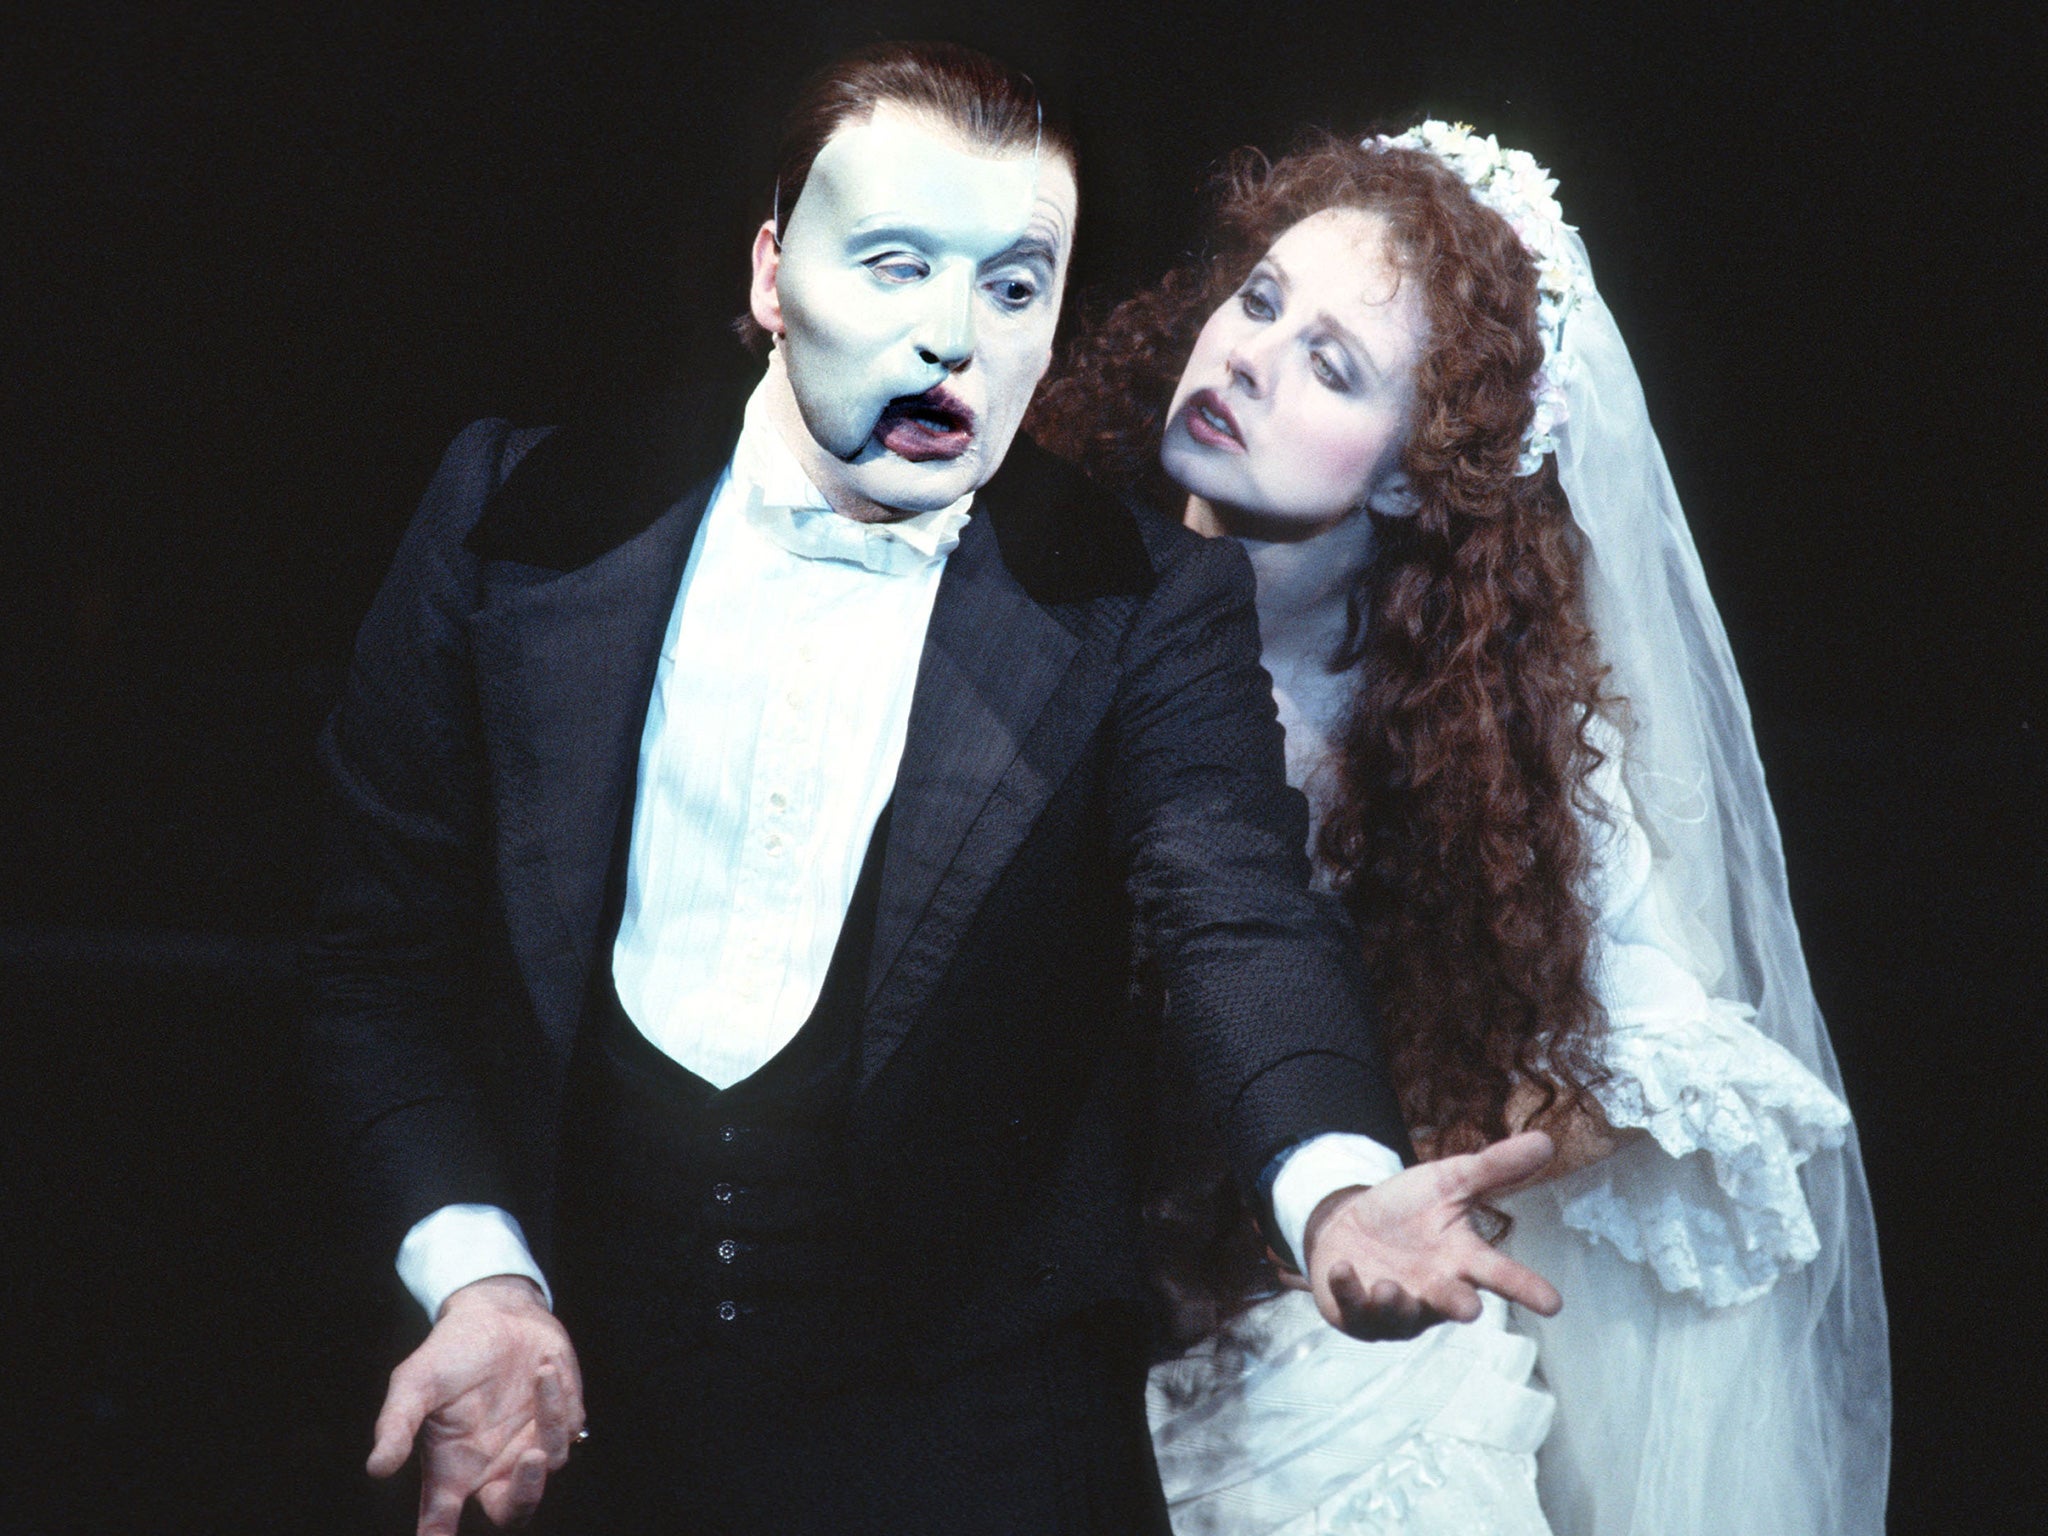 A scene from ‘The Phantom of the Opera’, for which Maria Bjornson designed the costumes